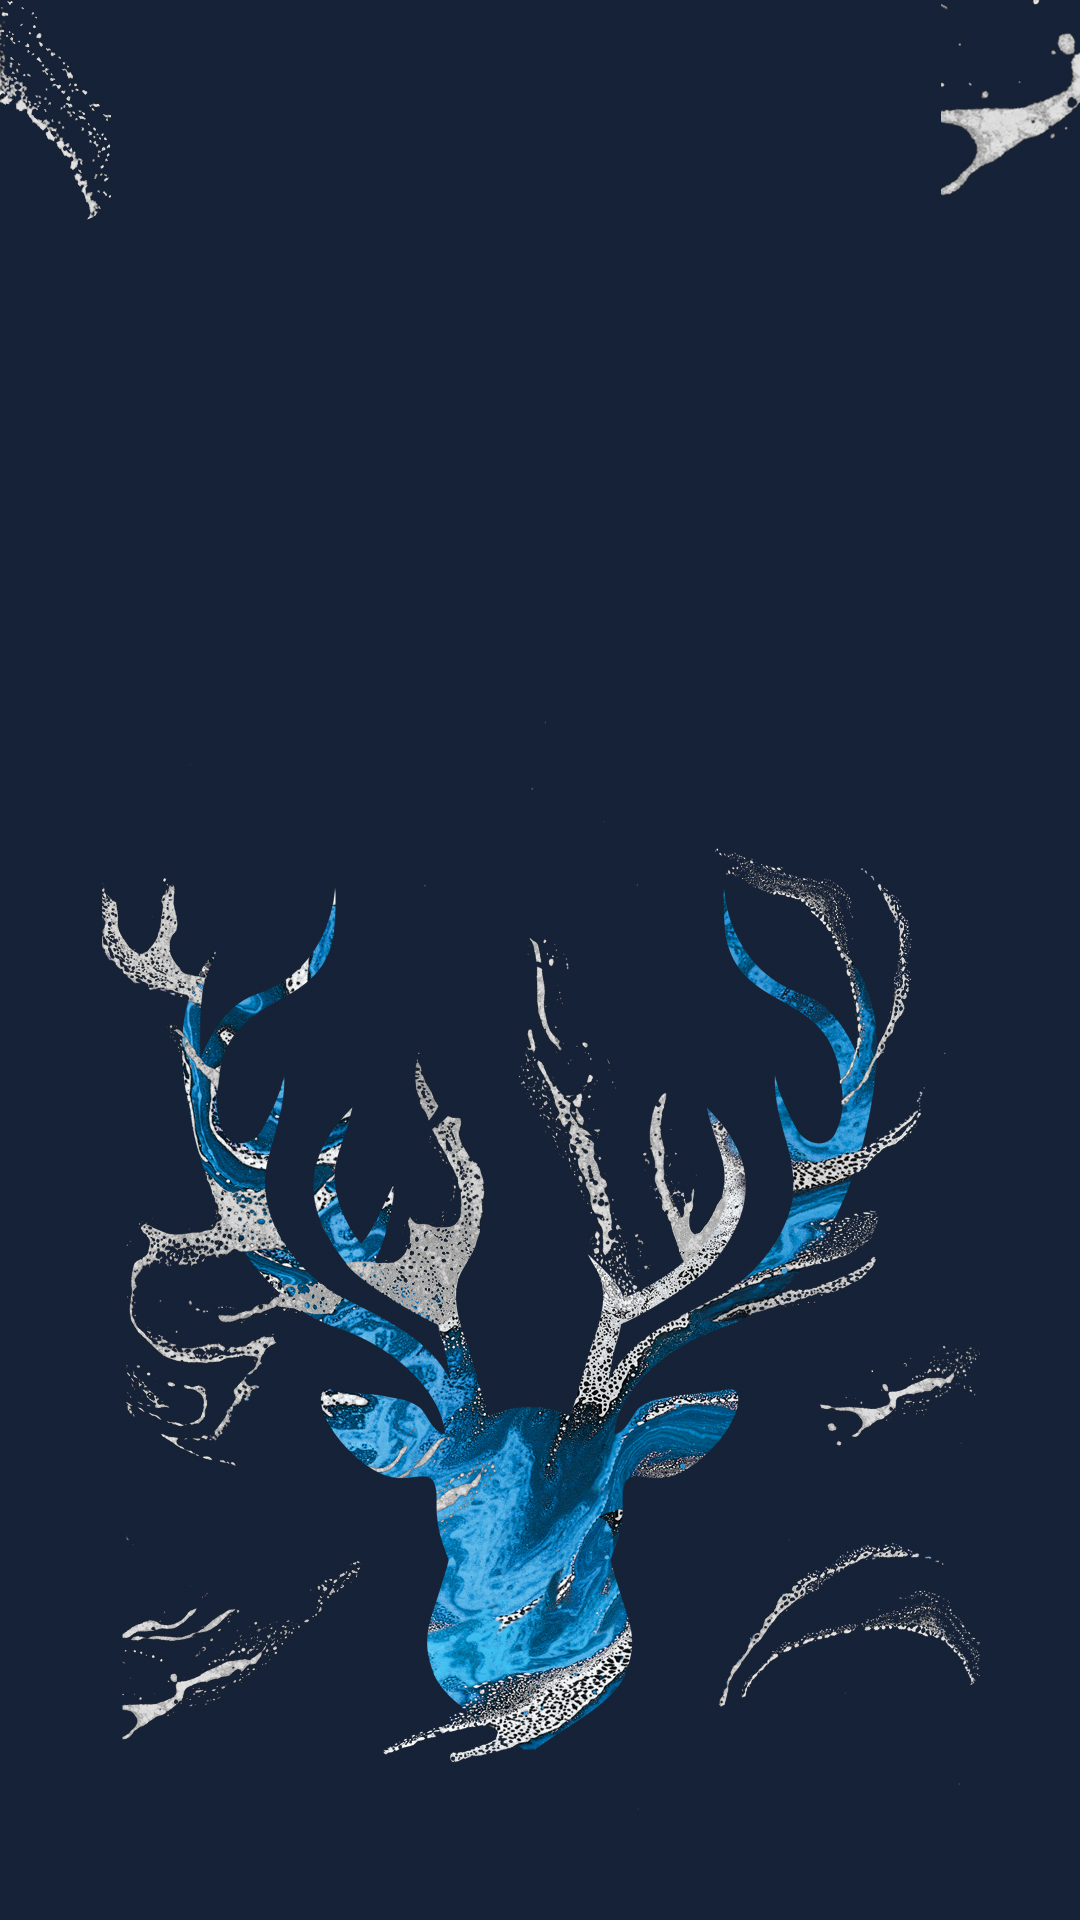 Abstract artistic representation of a stag with antlers that transition into branches, set against a dark blue background with white and lighter blue splatter, resembling a starry night sky.